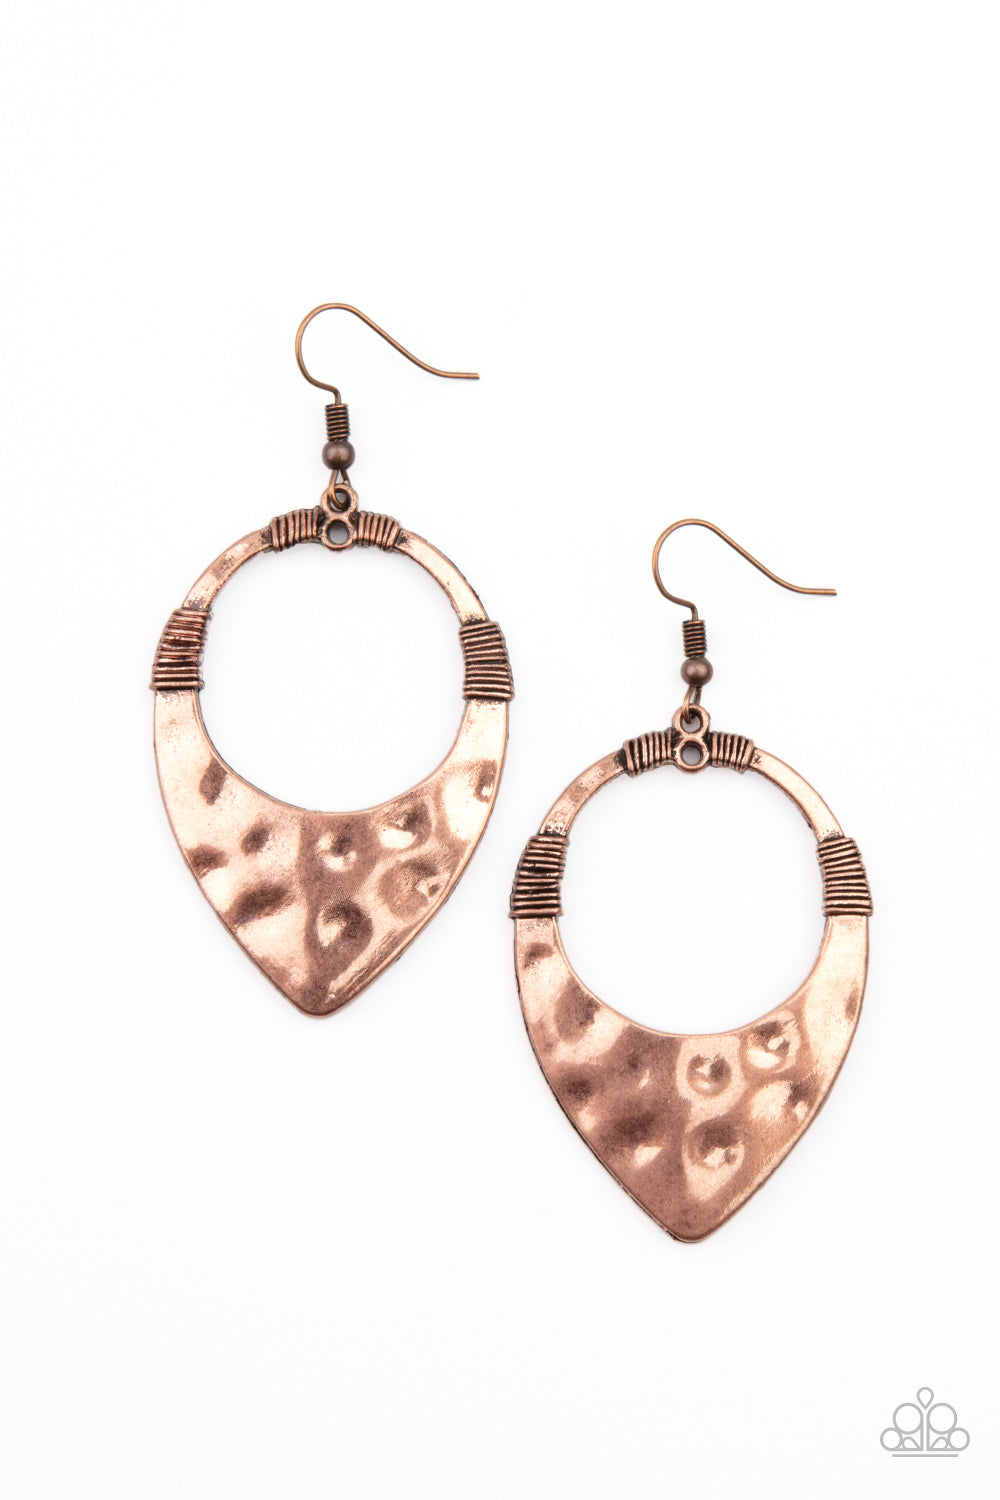 Instinctively Industrial - Copper Earrings - Princess Glam Shop